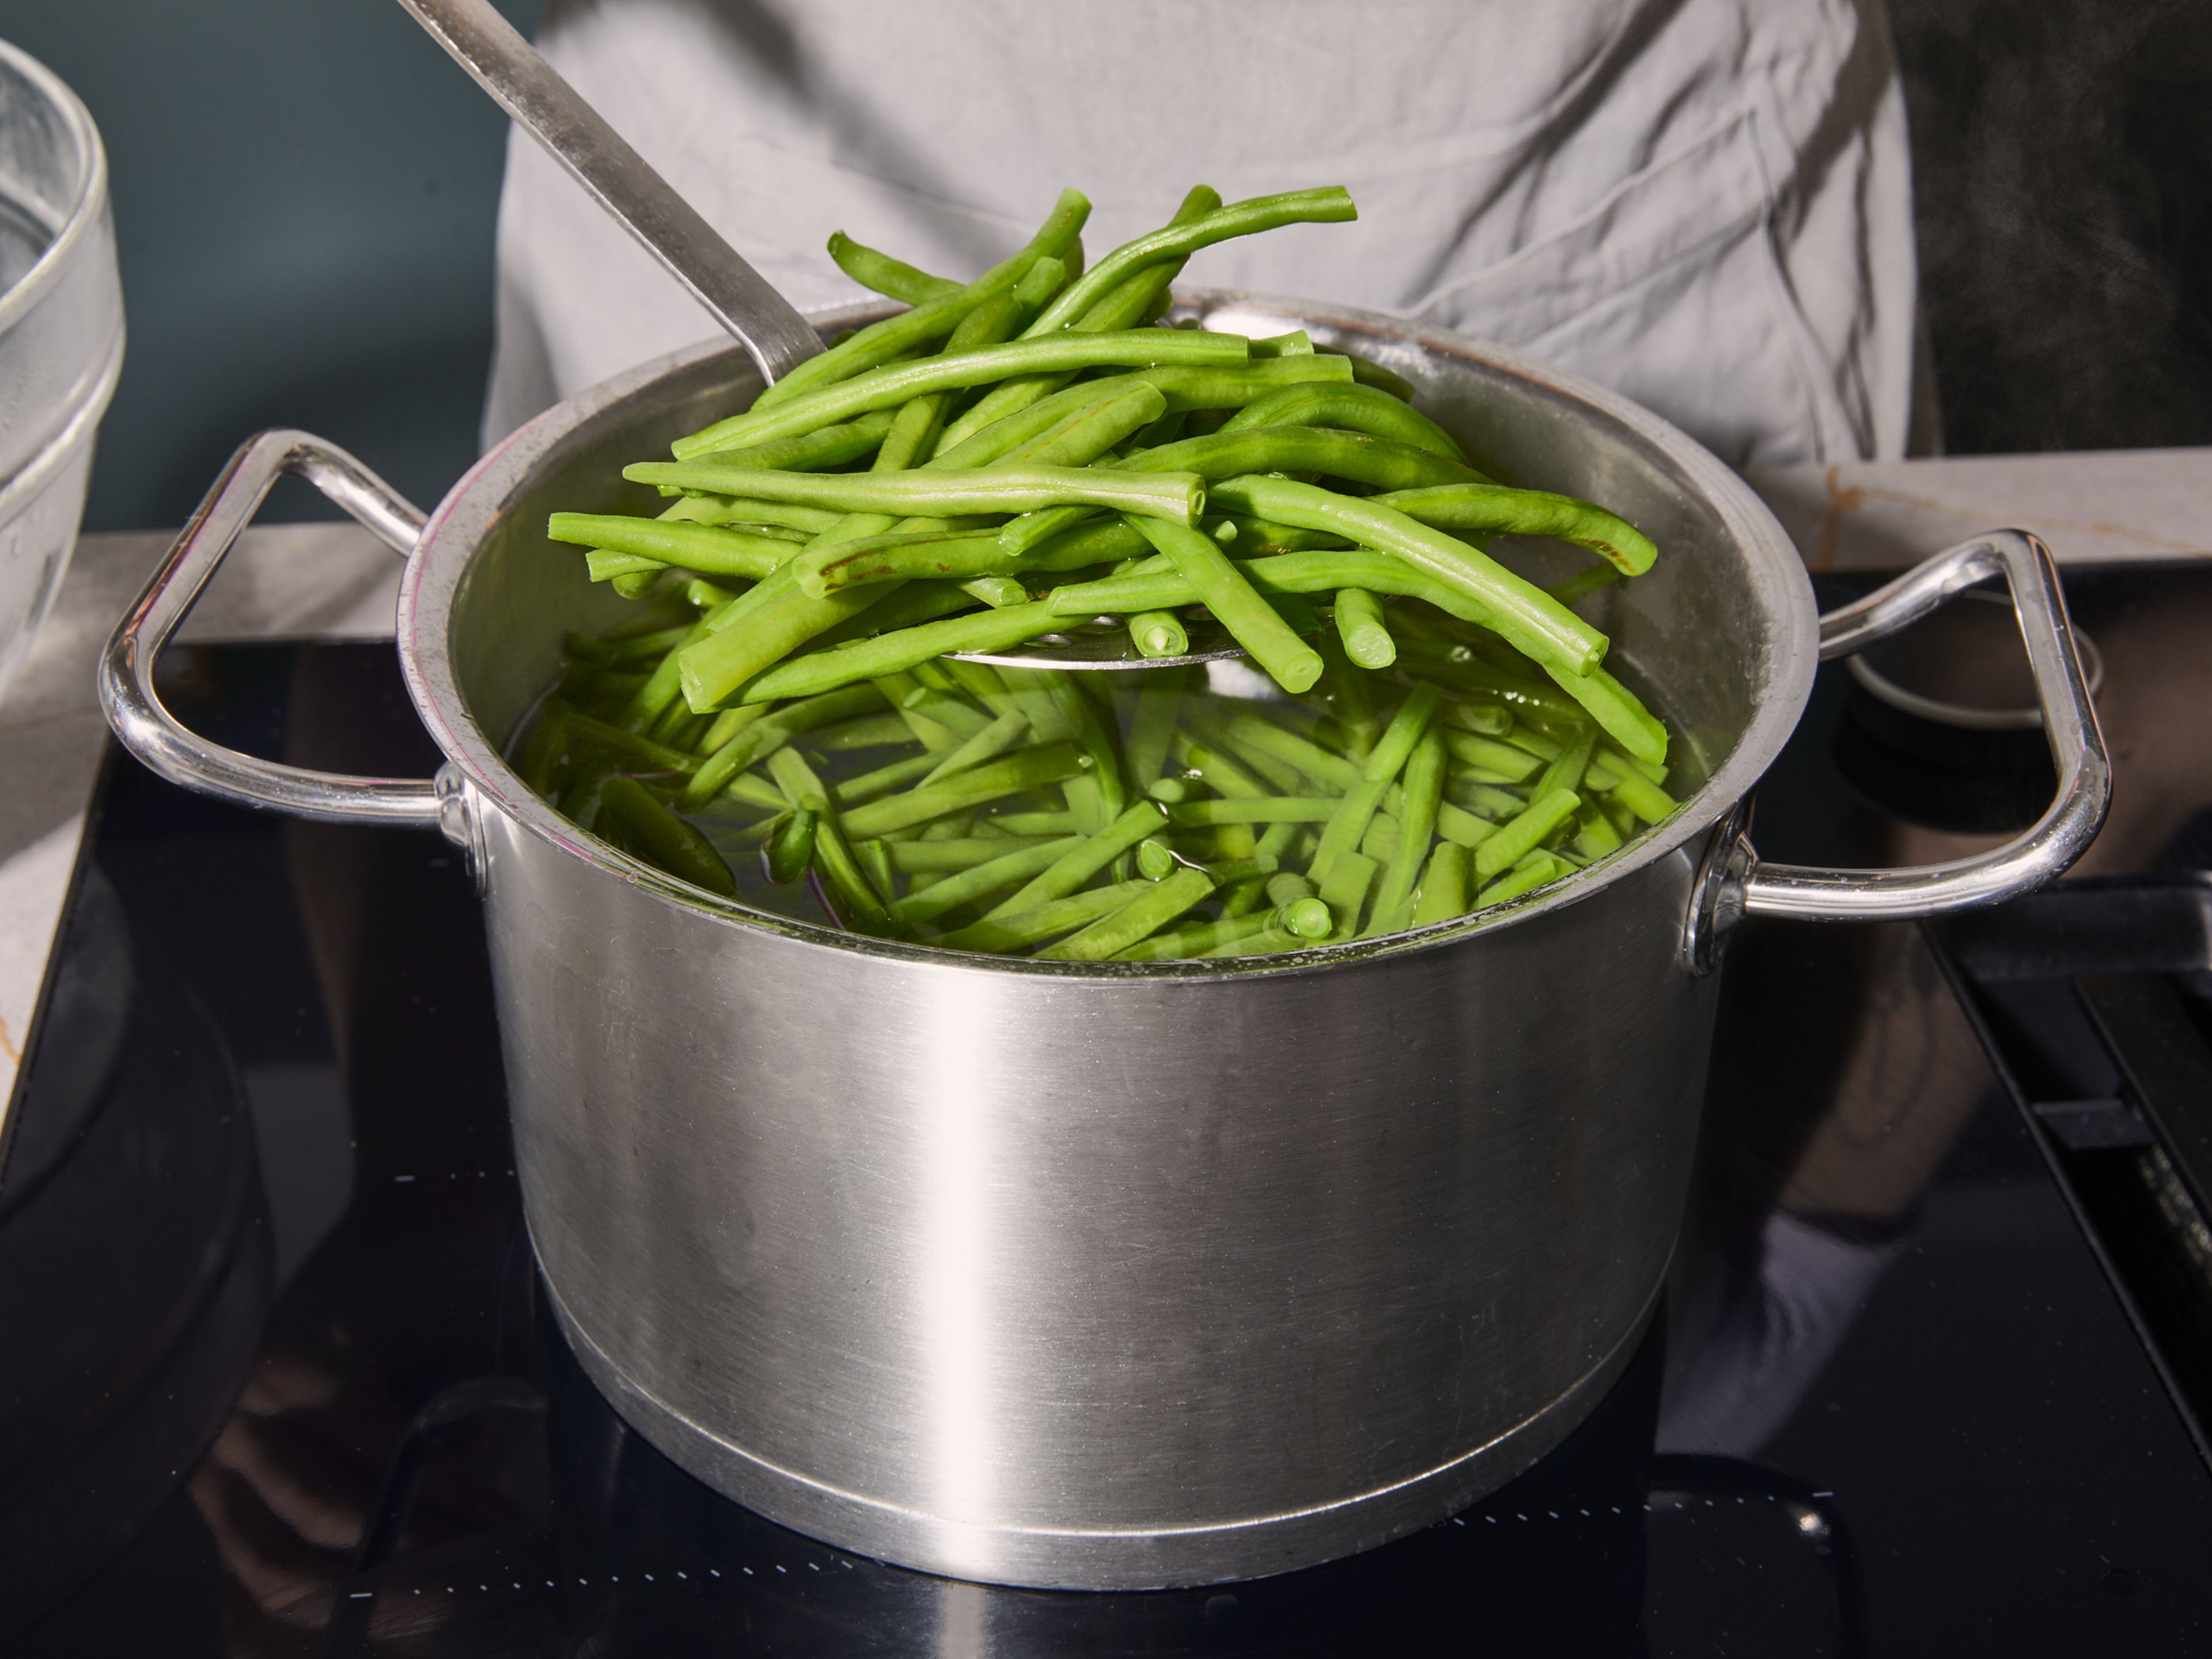 To prepare the green beans, trim the ends off. Bring a large pot of salted water to a boil. Blanch the beans for approx 8–12 min., according to your preferred doneness.